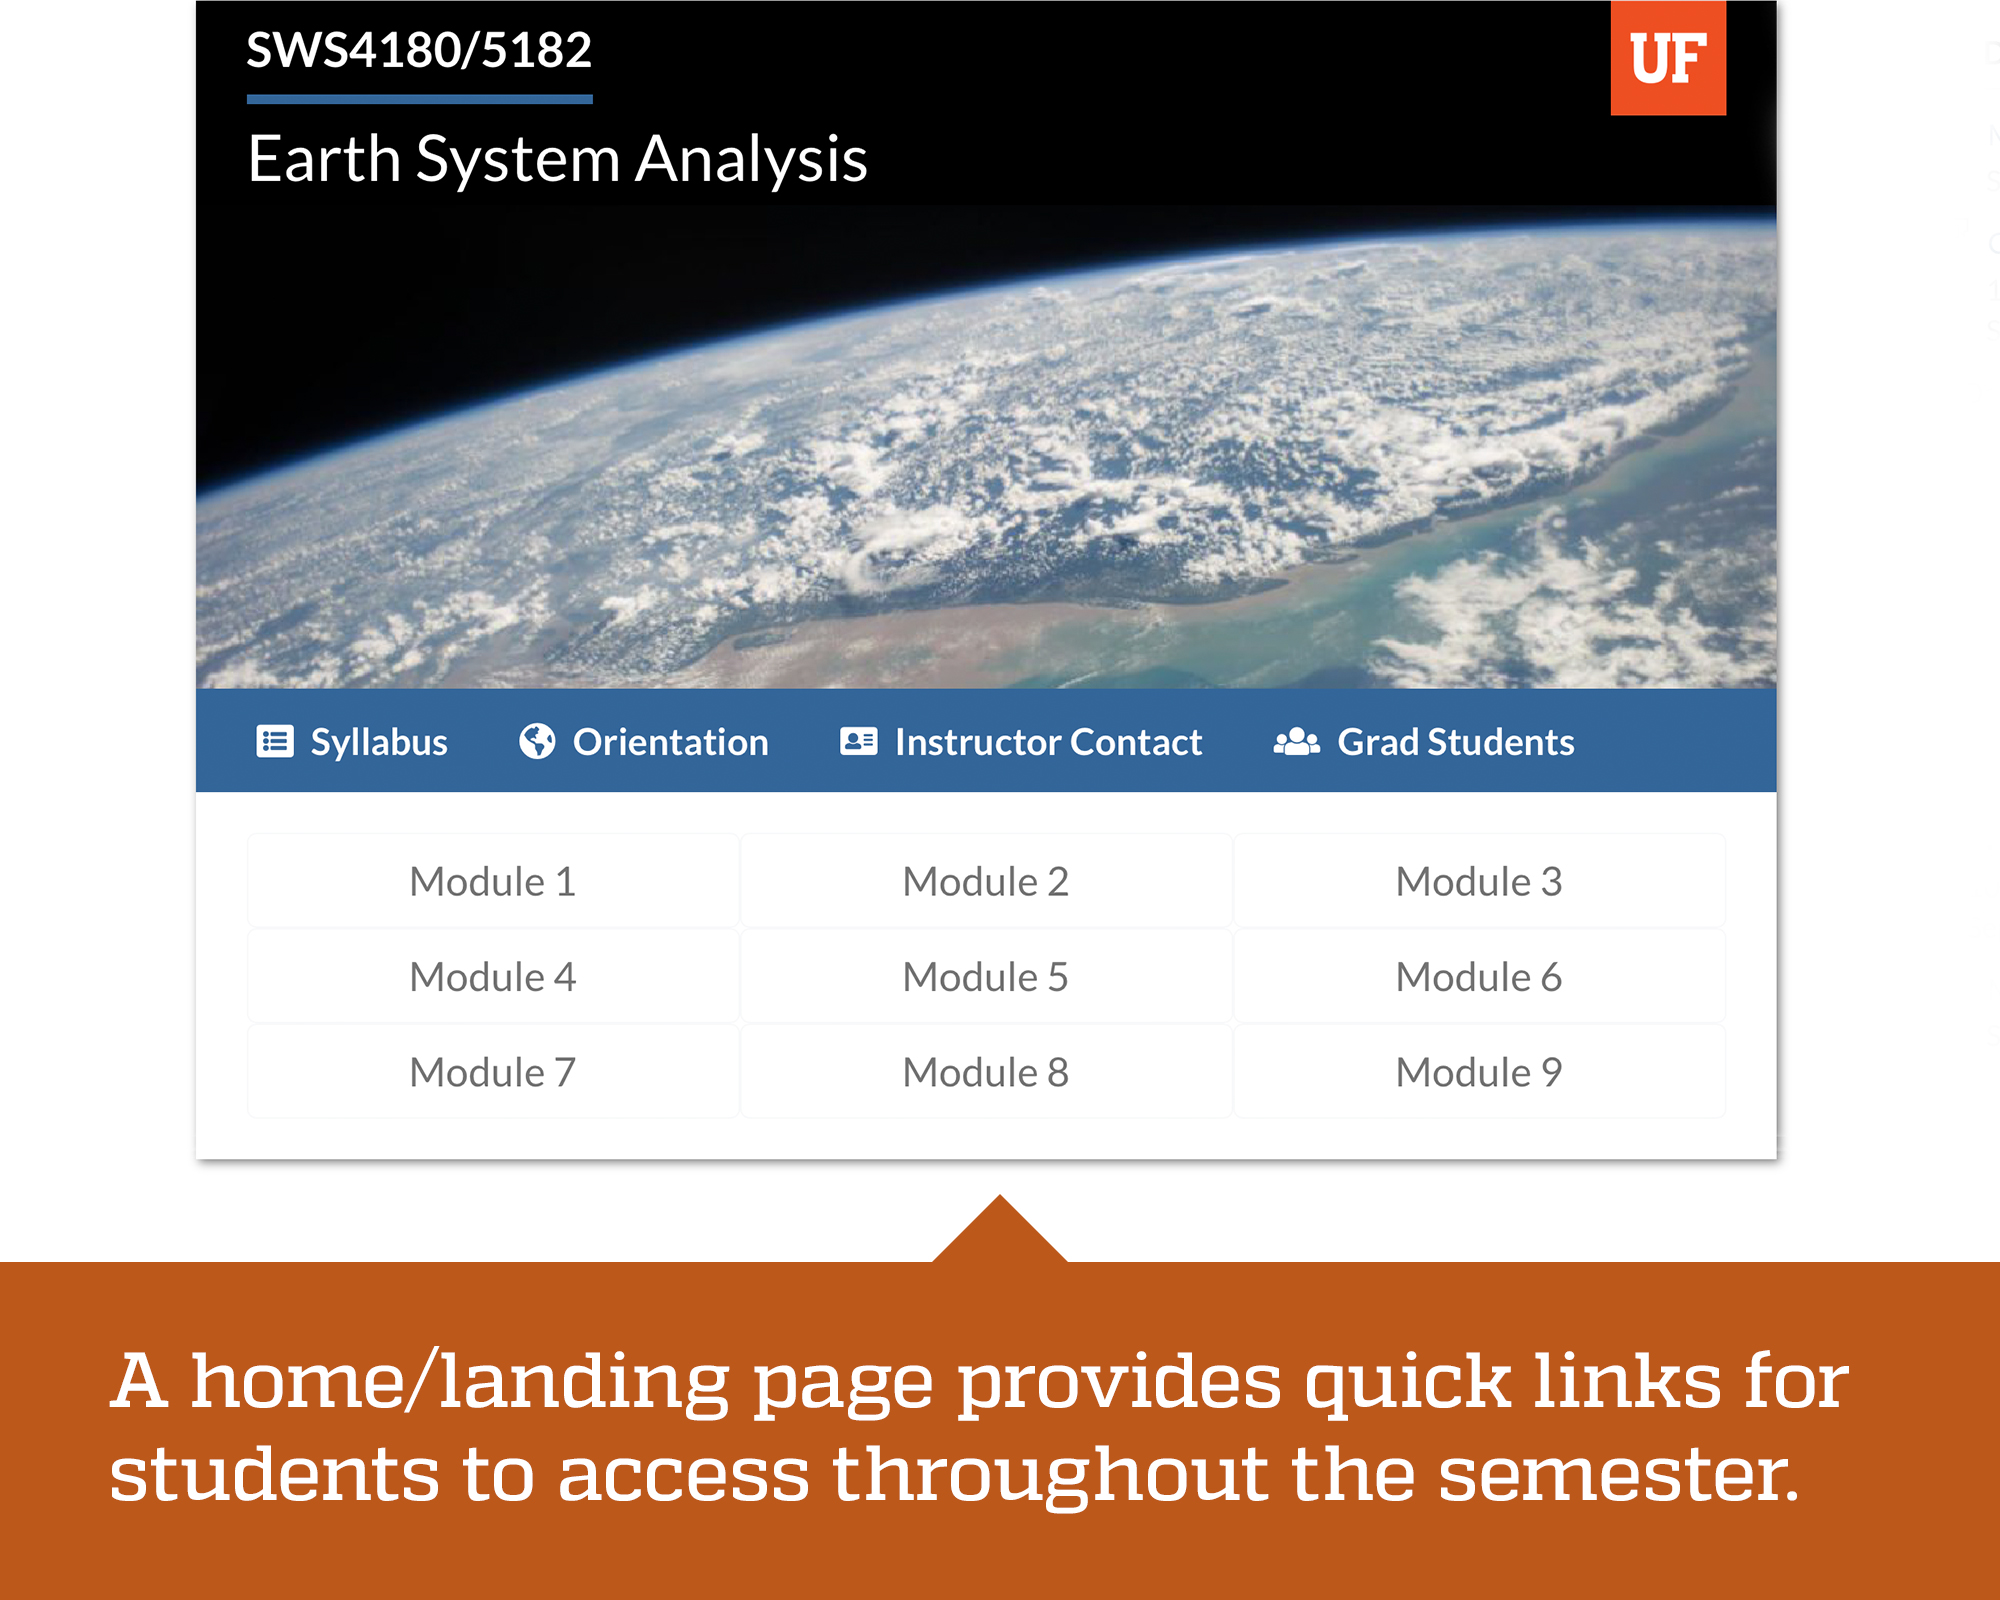 Course landing page of course design at Center for Online Innovation and Production at UF